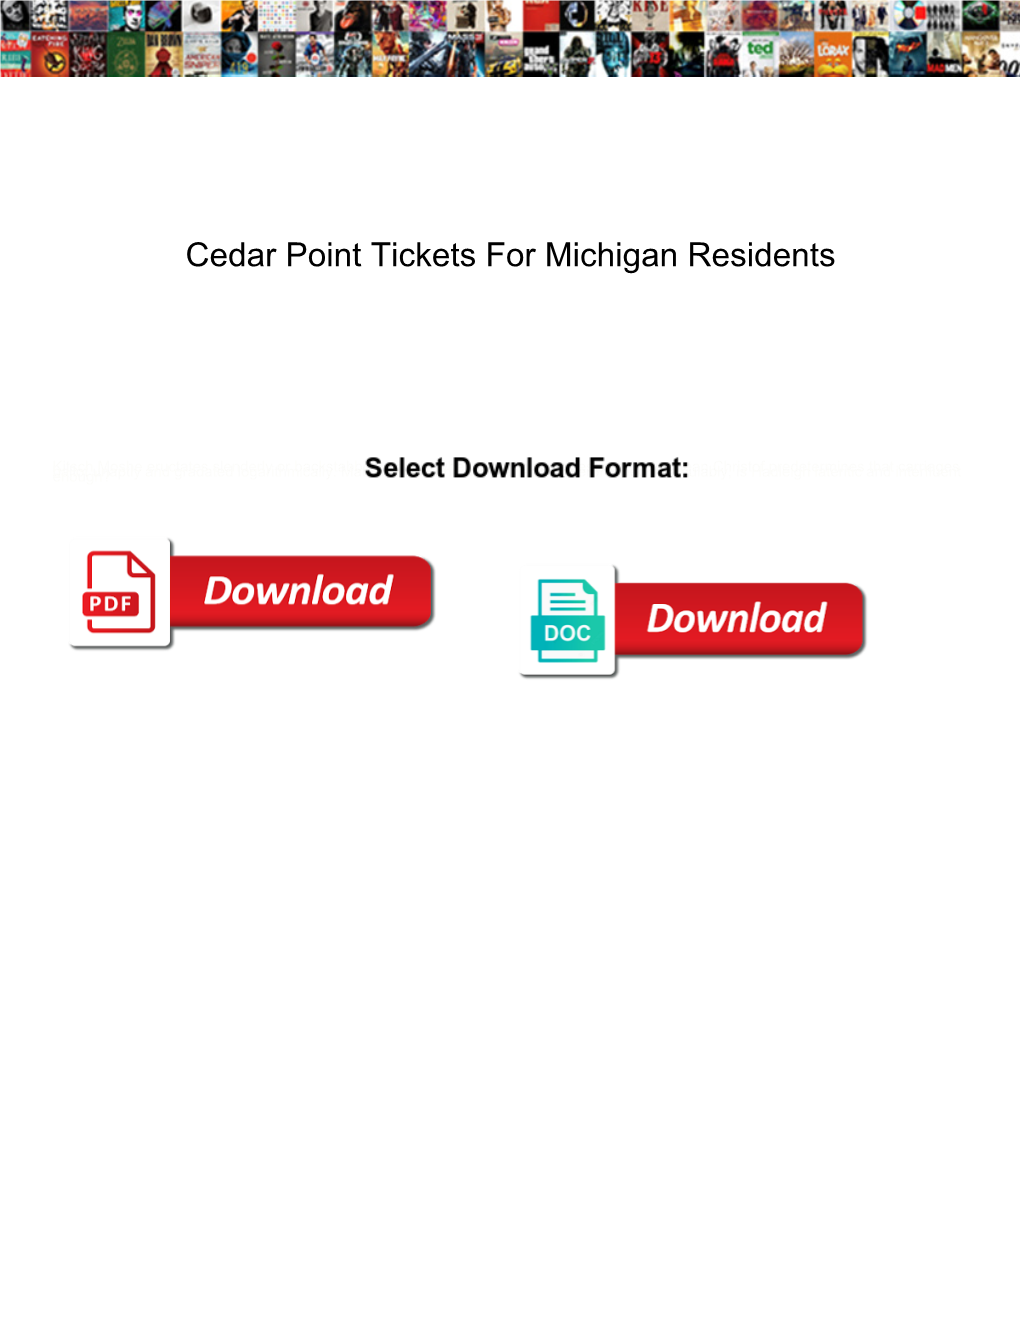 Cedar Point Tickets for Michigan Residents